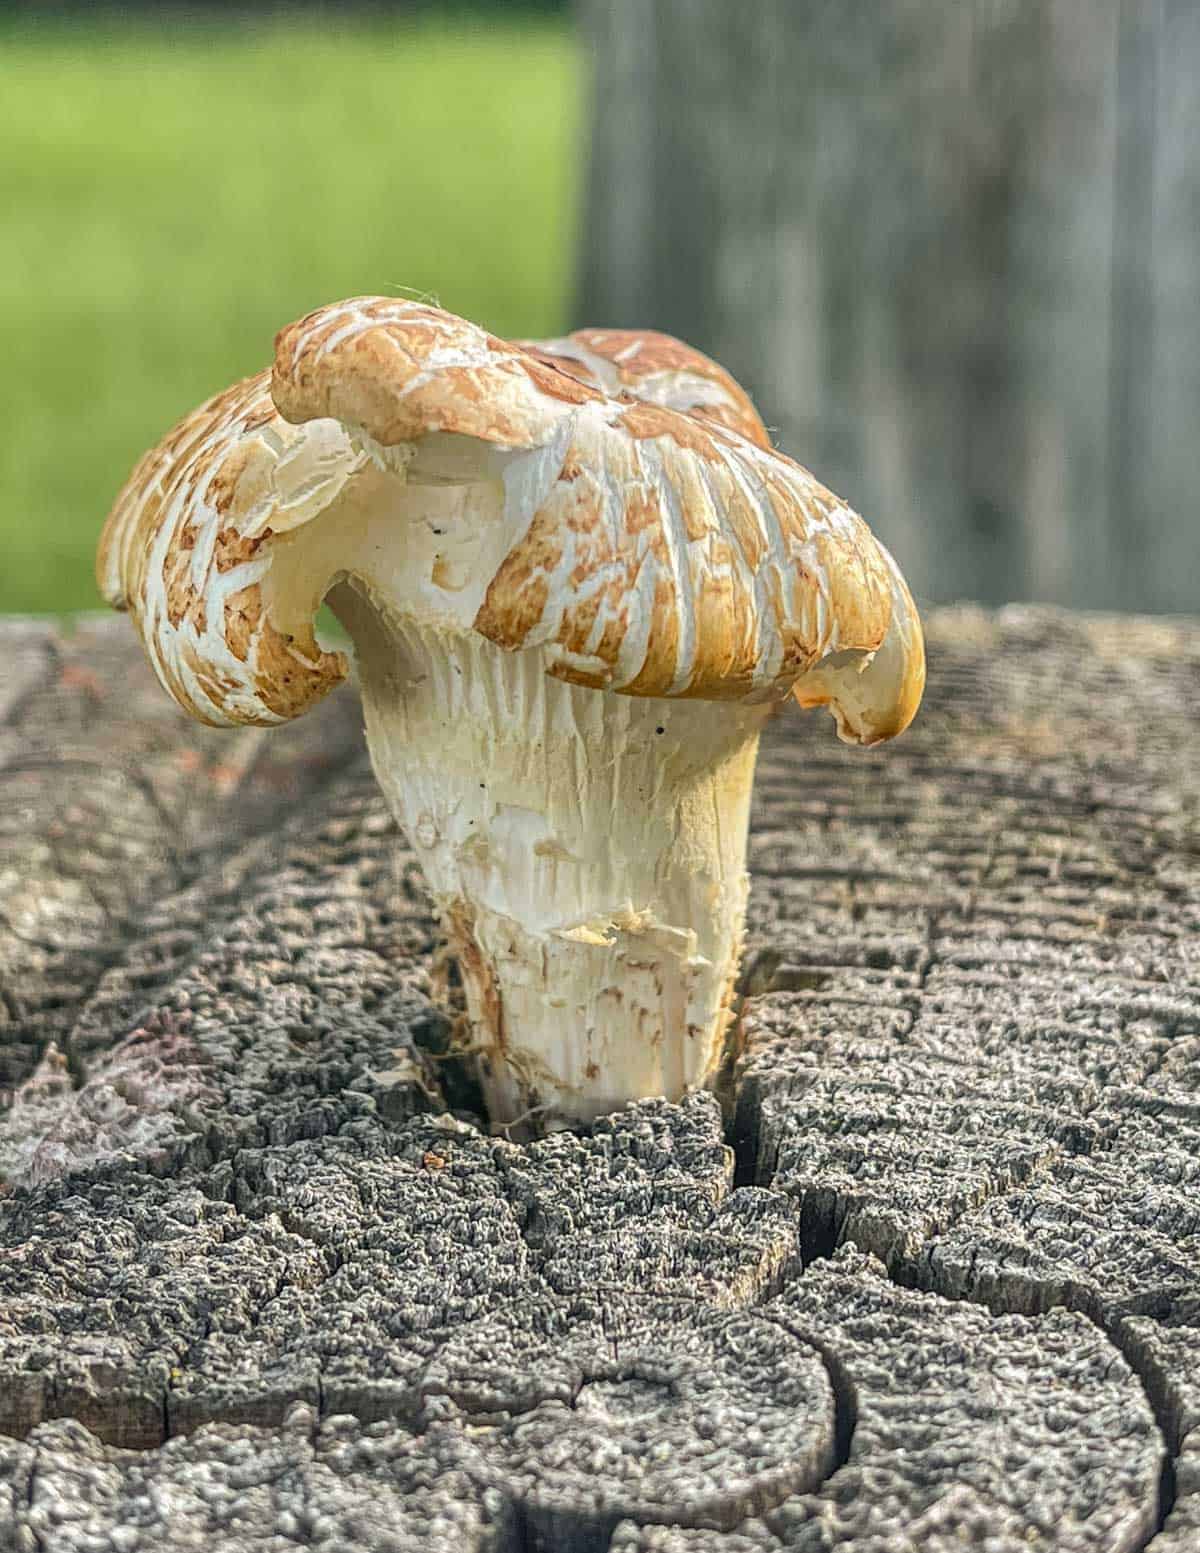 mushroom growing from a red pine stump.